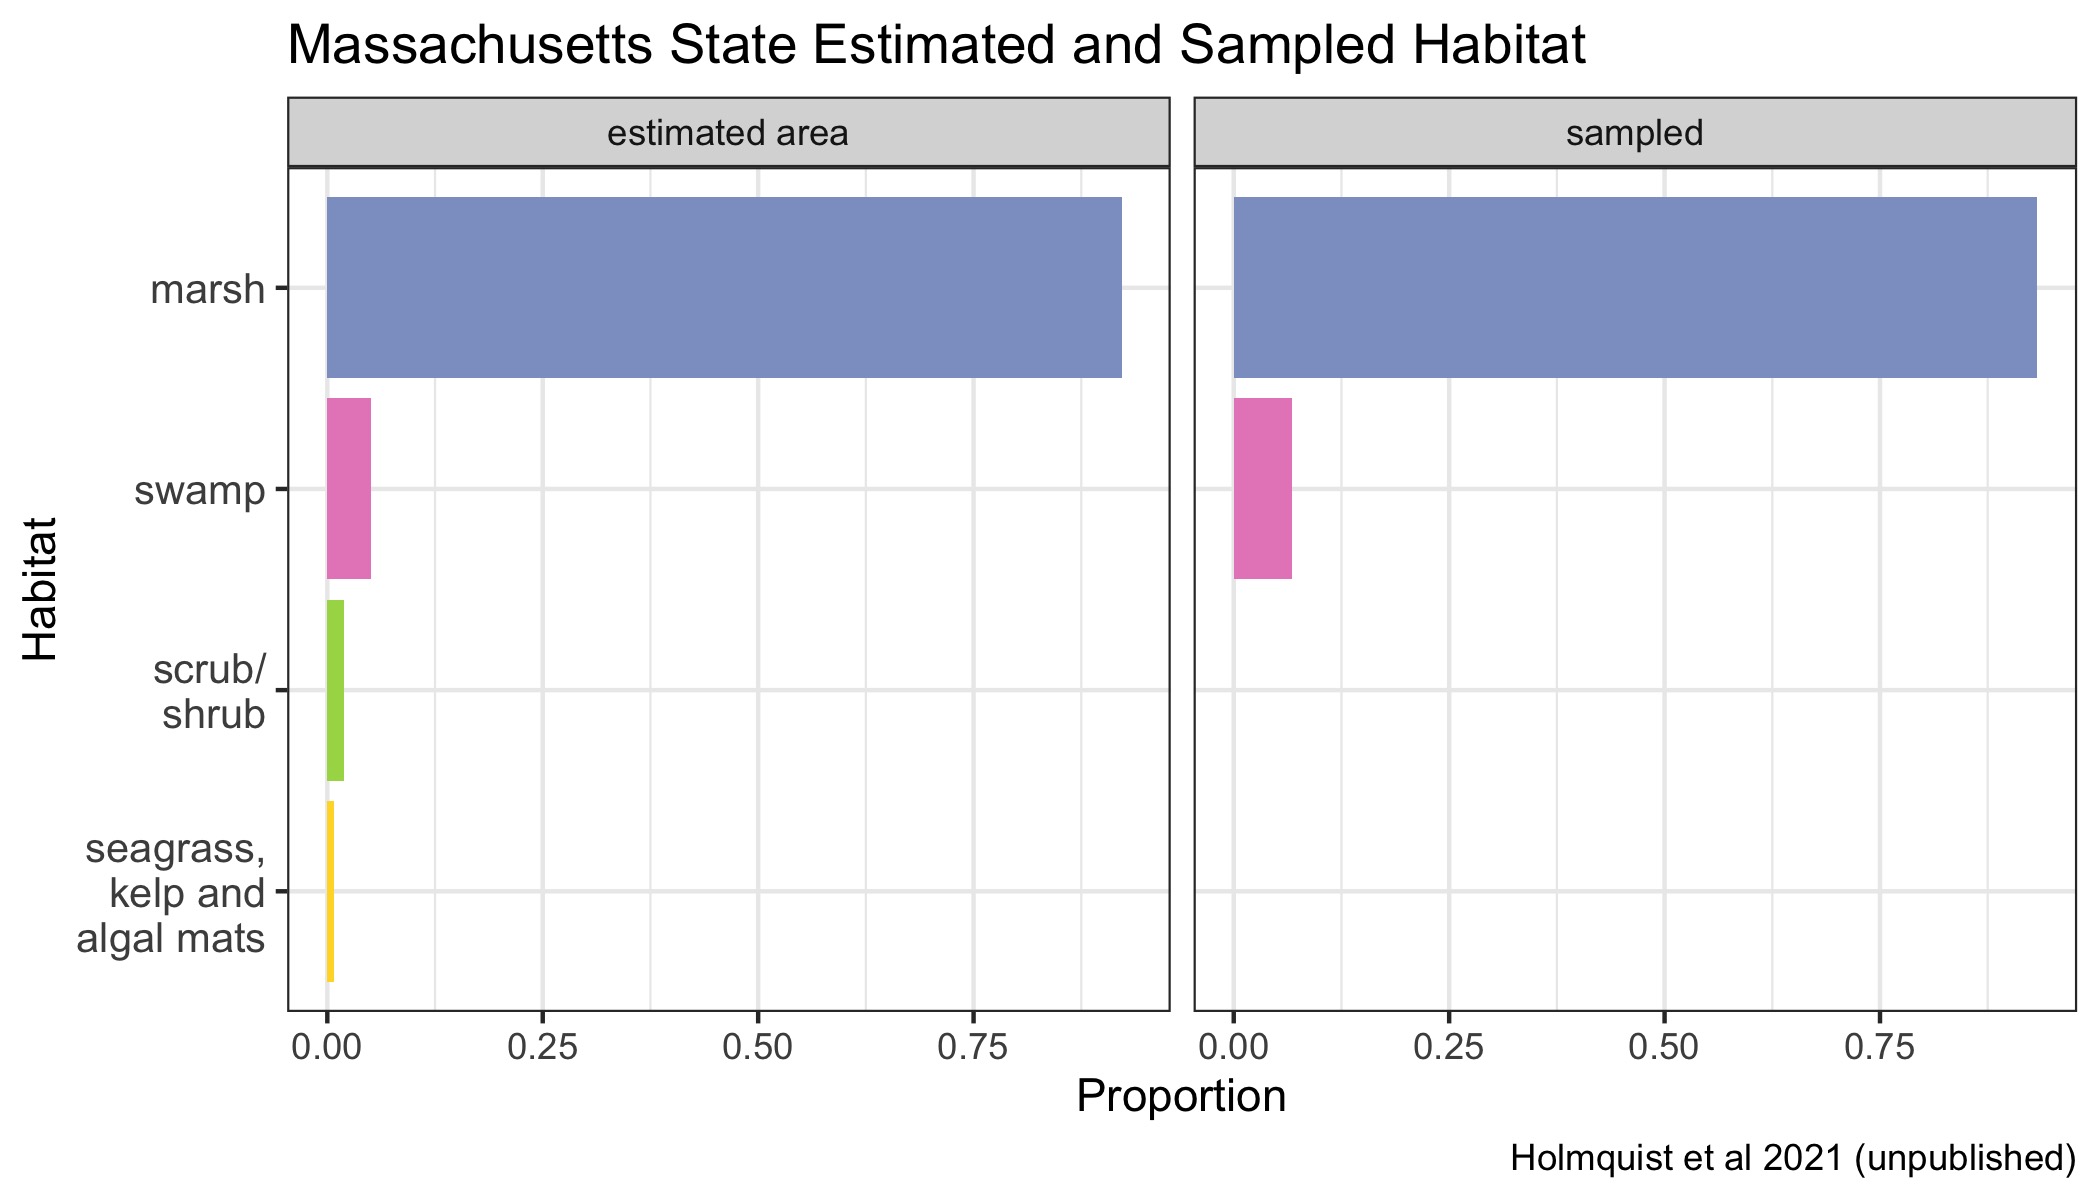 Proportions of various Blue Carbon habitats across Massachusetts state represented in the dataset in proportion to their estimated area. Seagrasses, kelp beds and algal mats are all combined into a single category, because they are combined in the underlying mapping products.